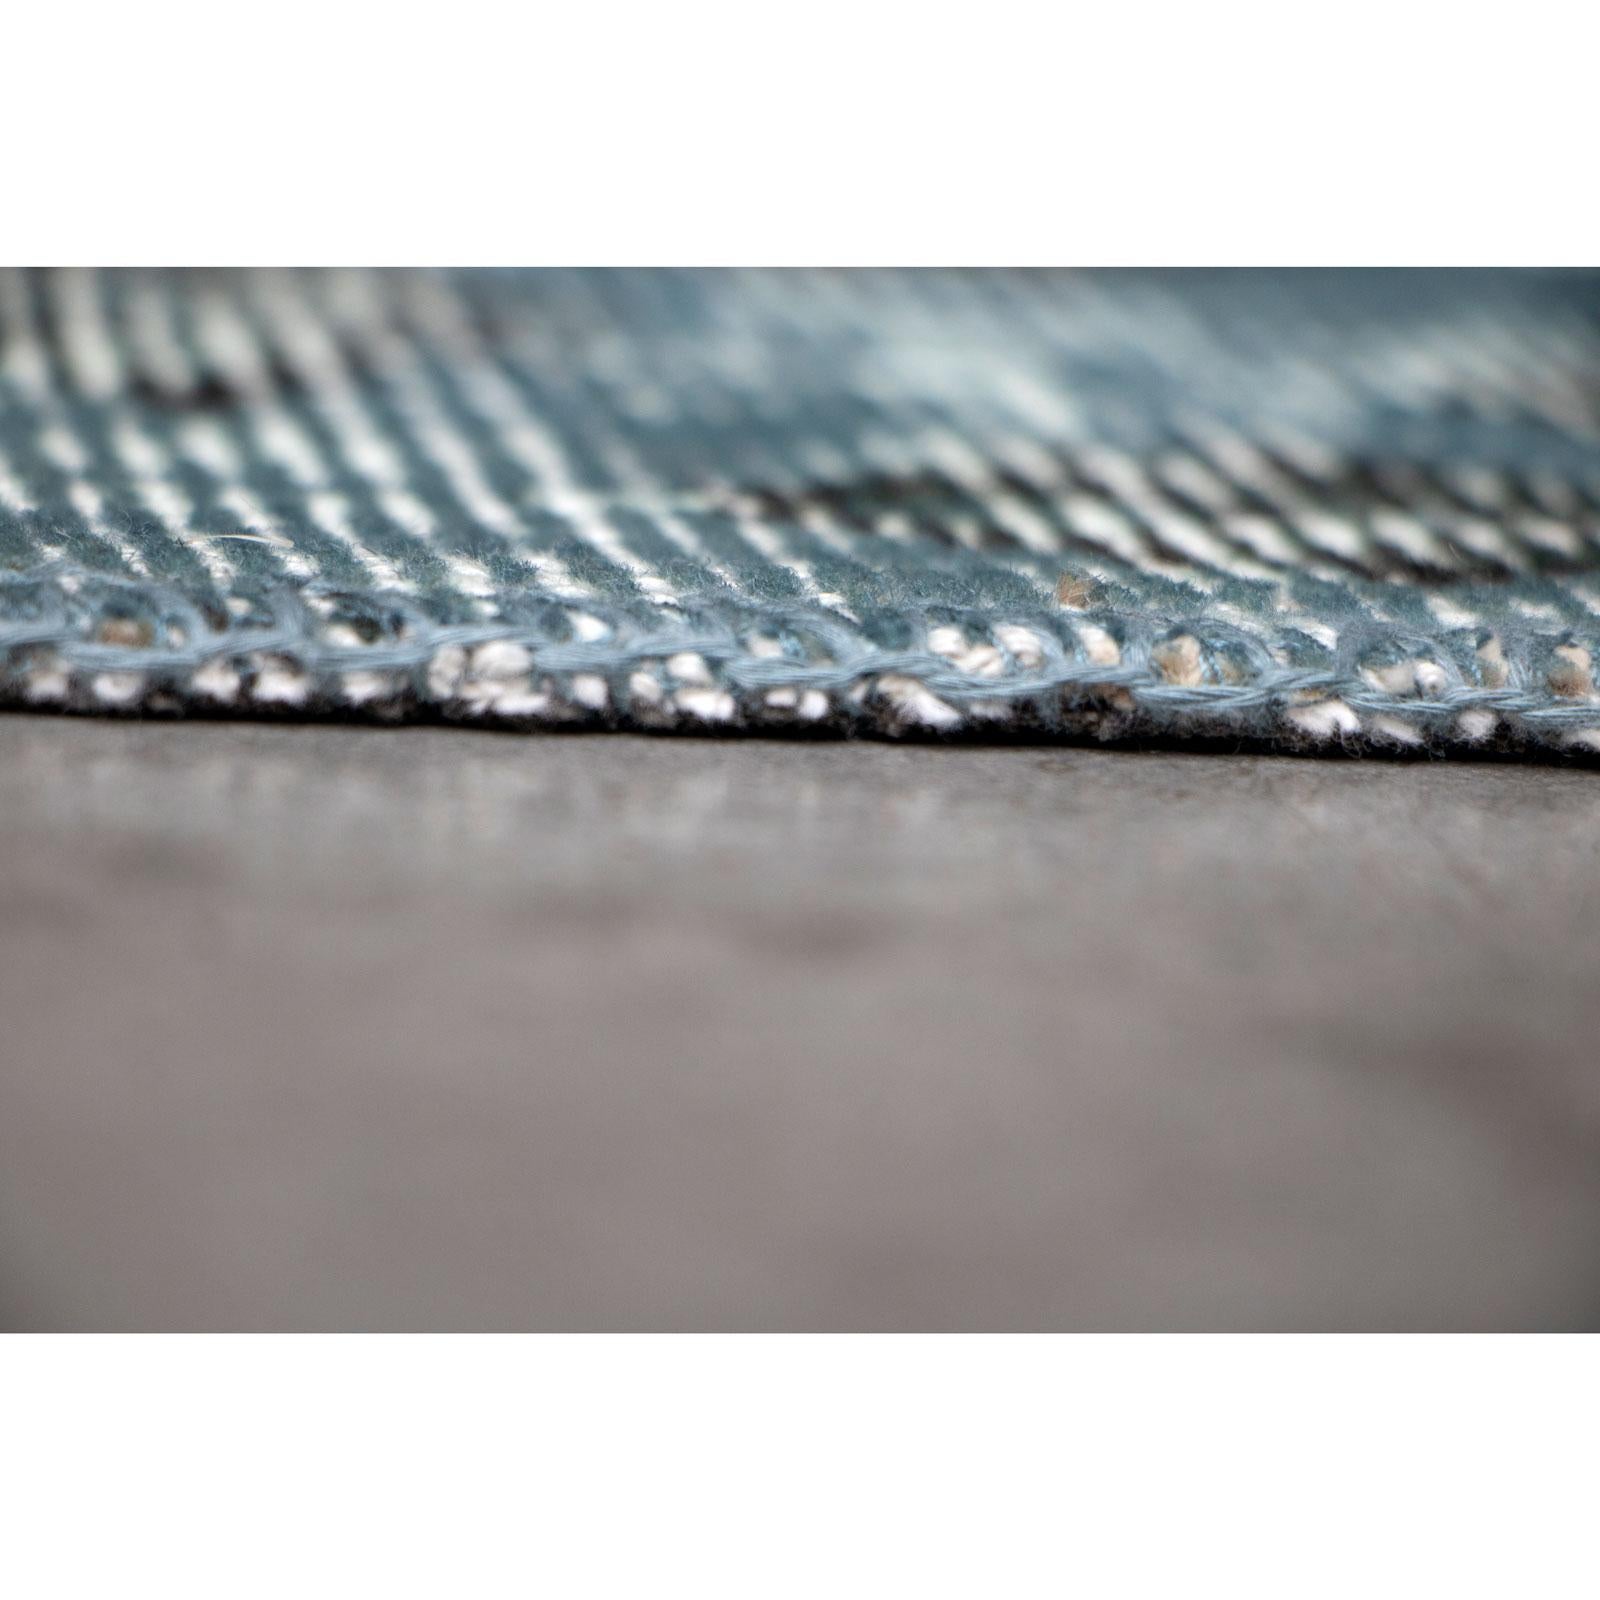 Contemporary Antique Chic Vintage Blue Brown Wool Cotton Rug by Deanna Comellini 250x350 cm For Sale